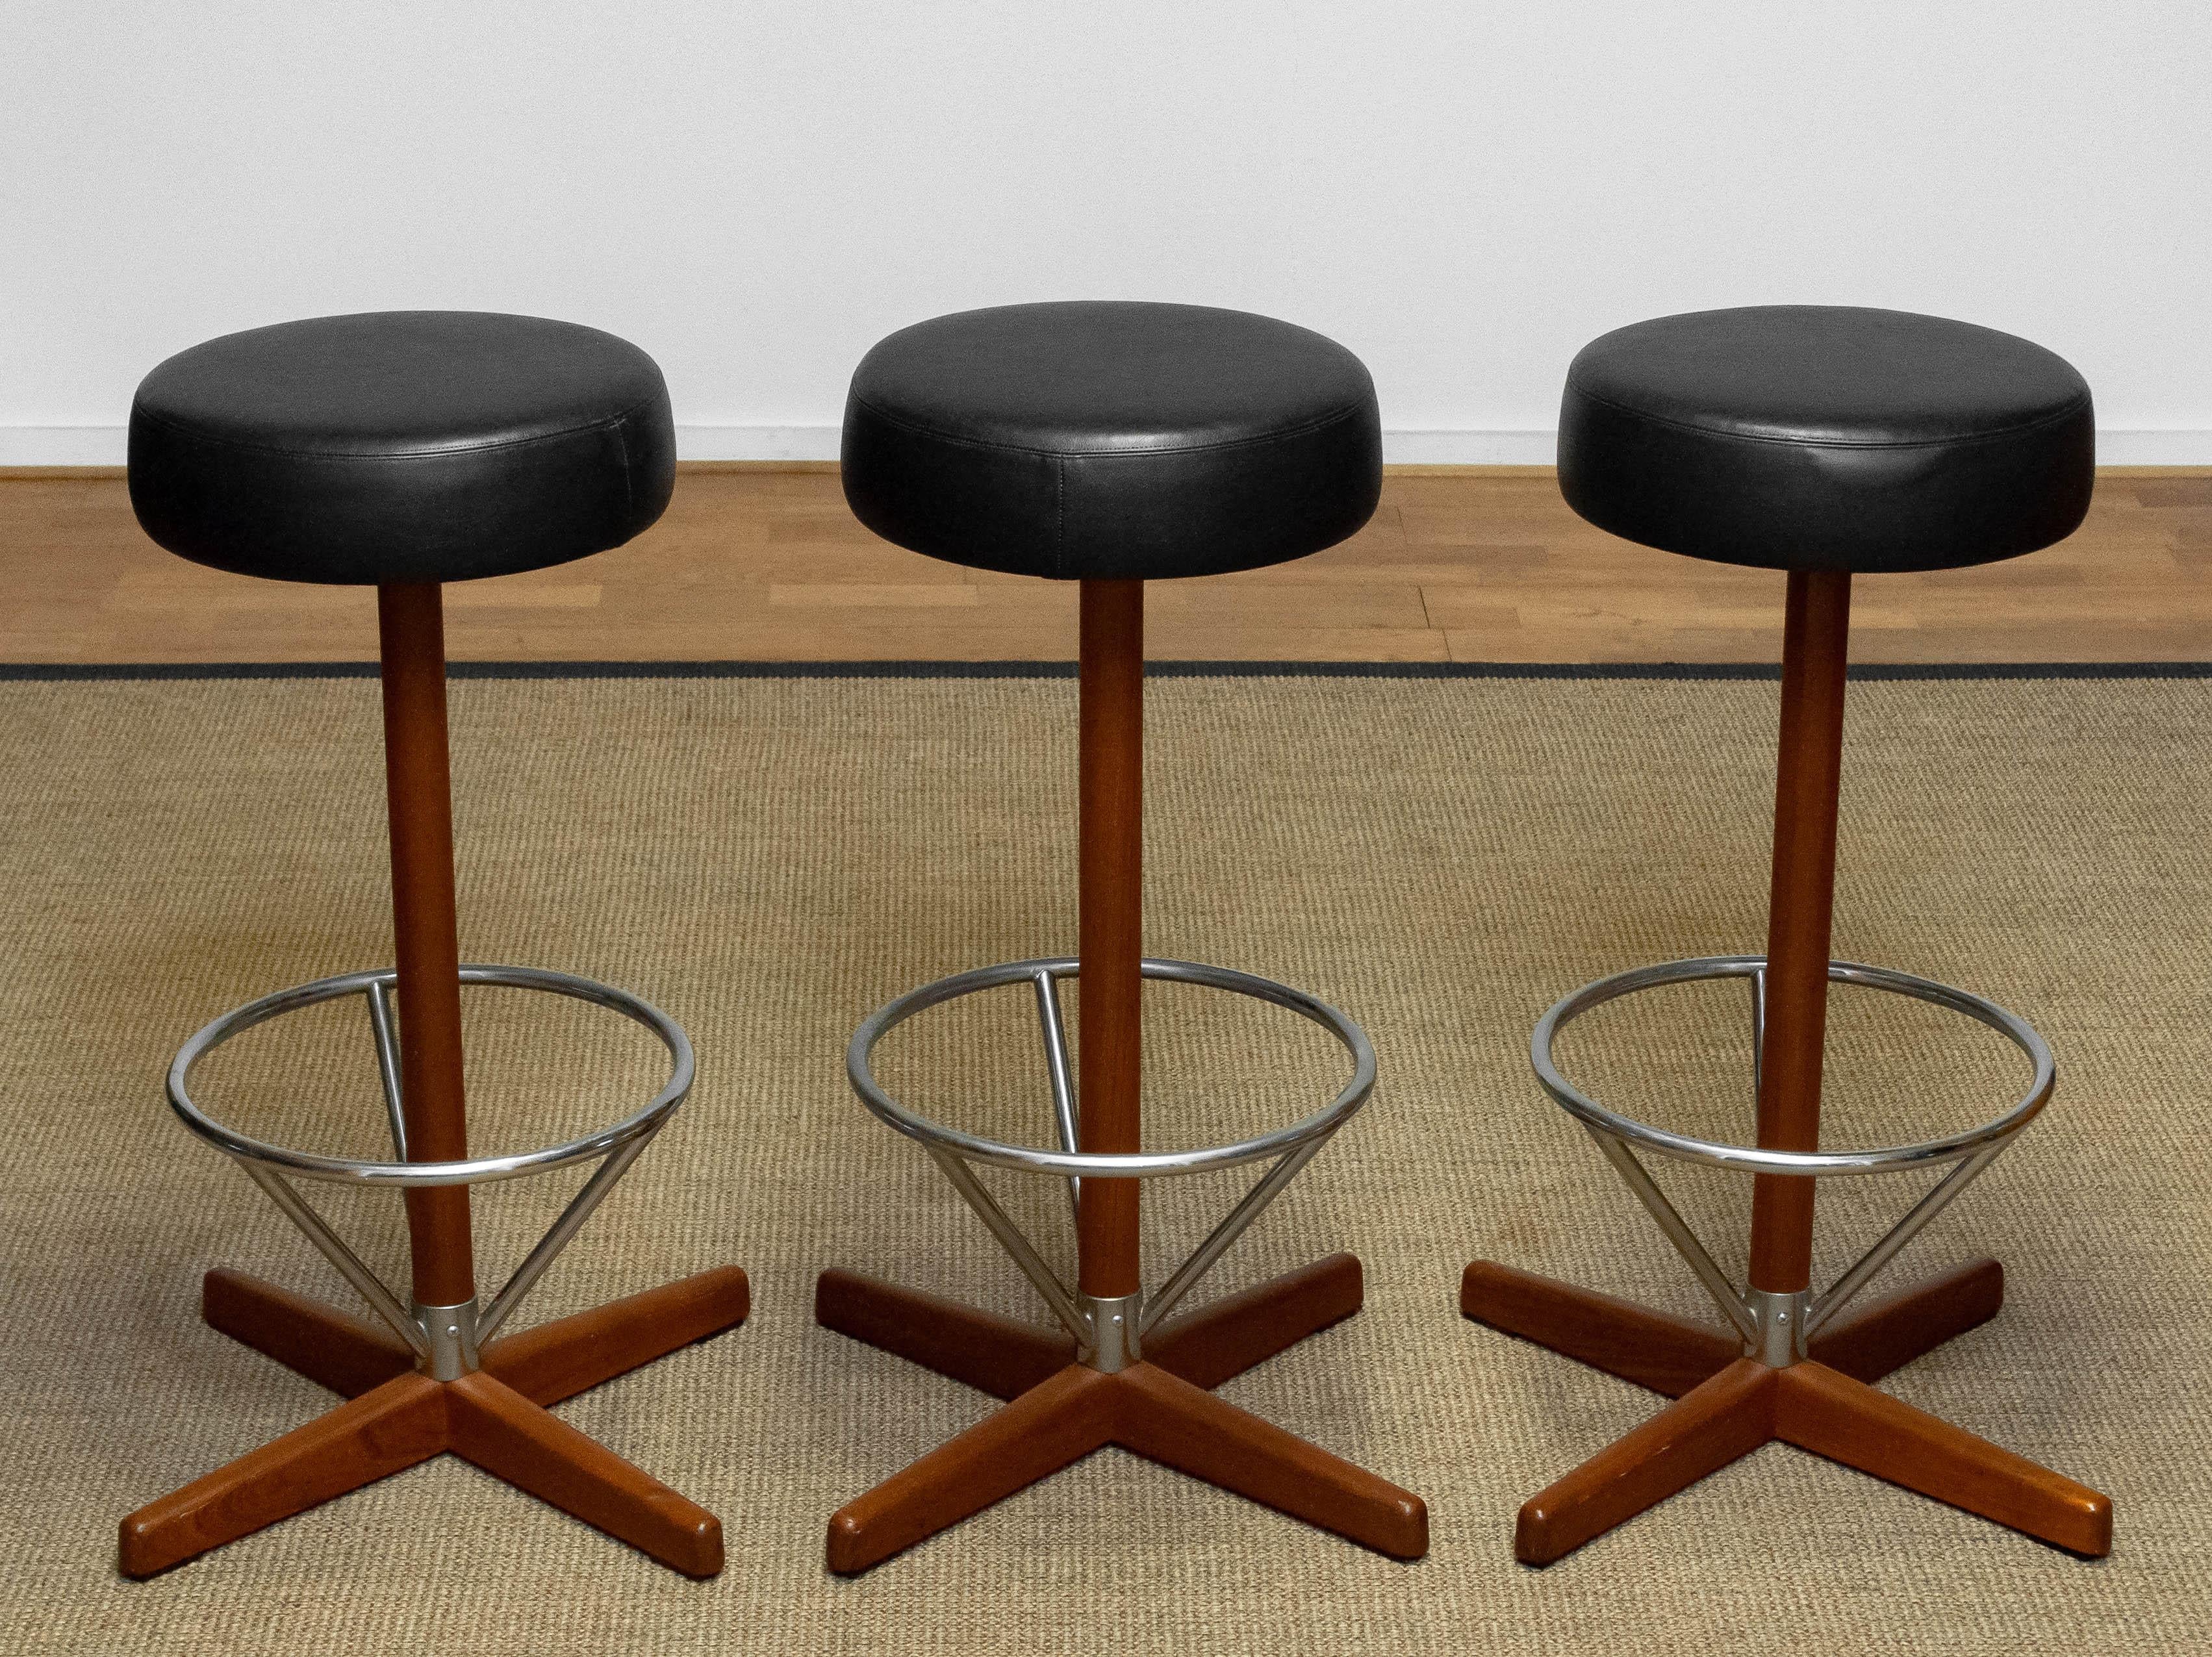 Beautiful group of three teak and chrome swivel bar stools designed by Börje Johanson for Johanson Design upholstered with black faux leather.
All three stools are in good condition.